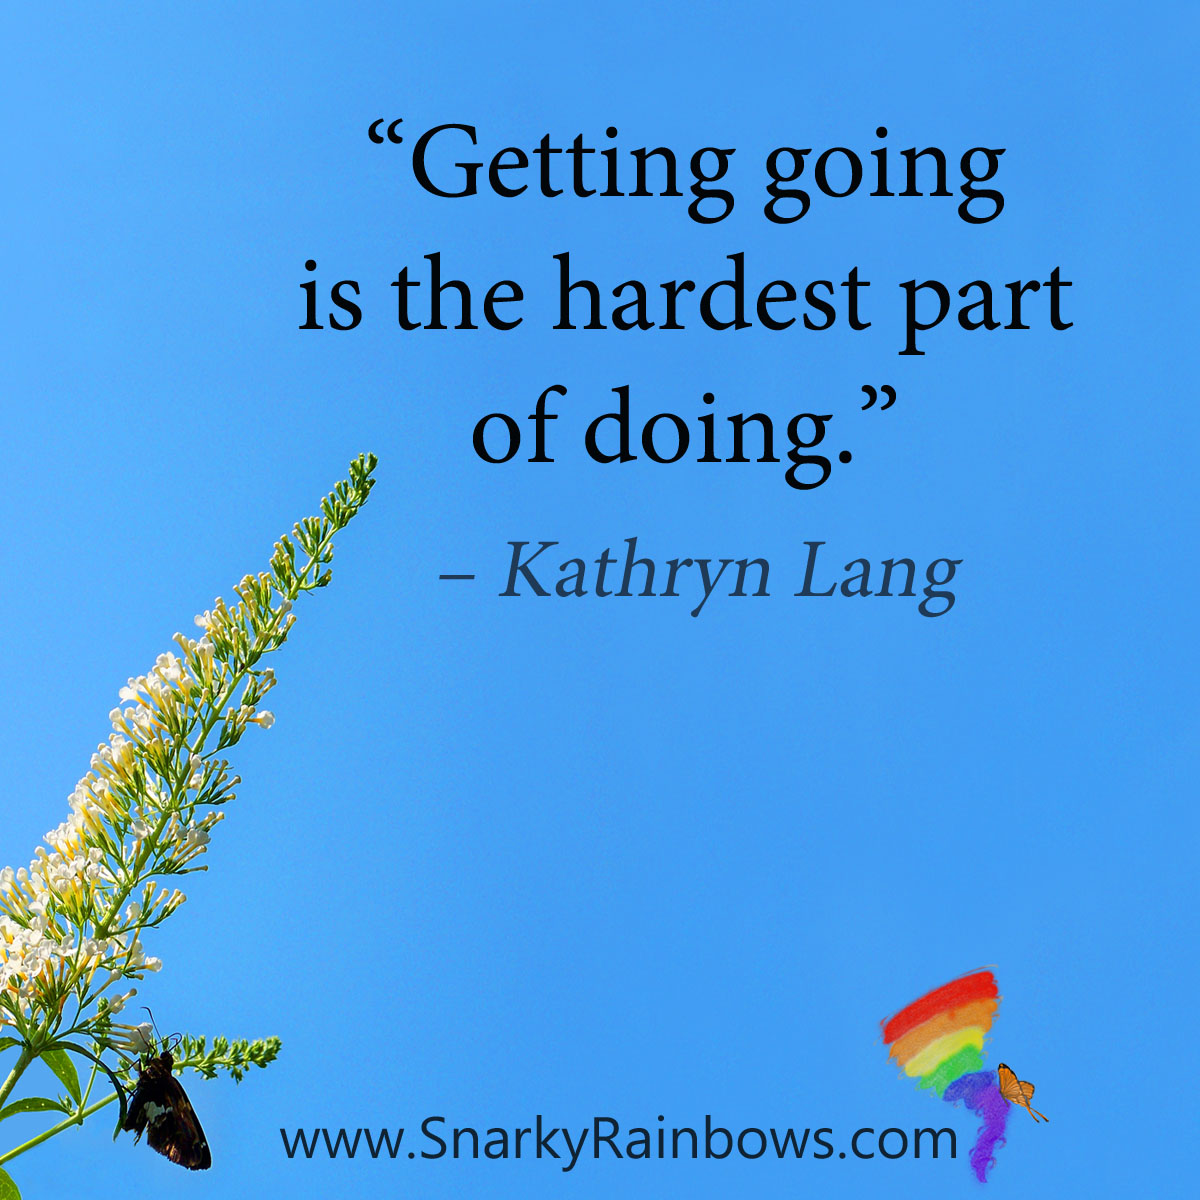 #QuoteoftheDay - getting going